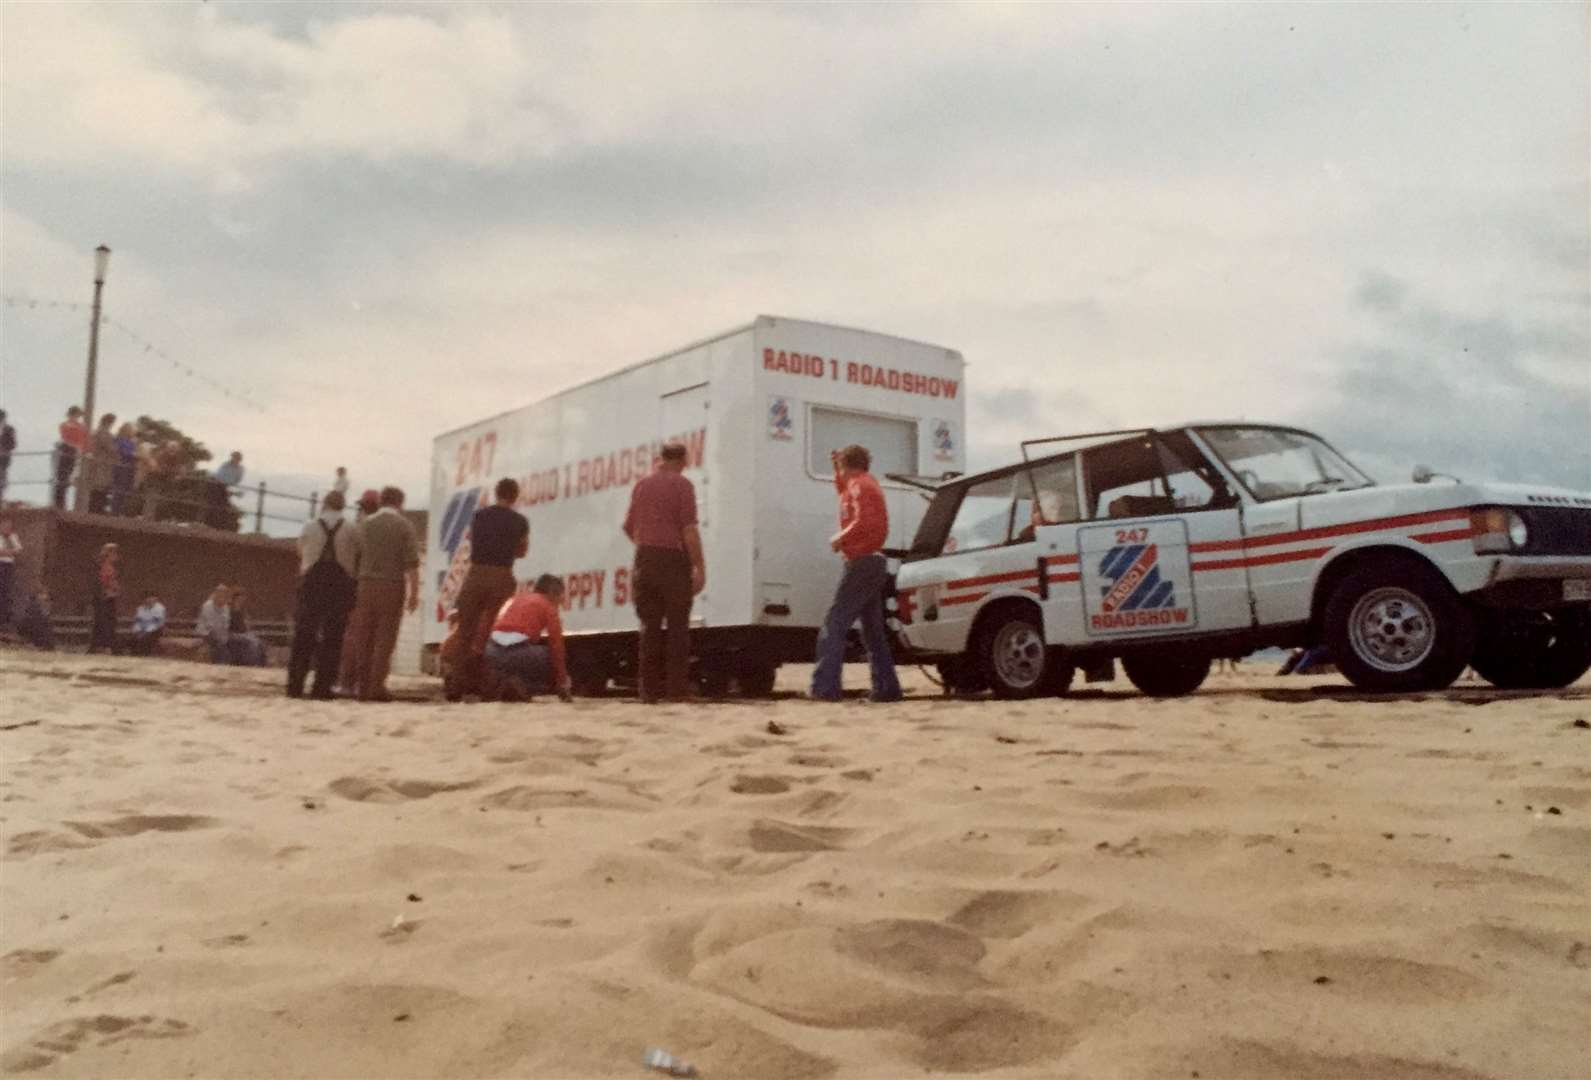 The Radio 1 Roadshow van gets stuck in the sand in Margate. Picture: Tony Miles